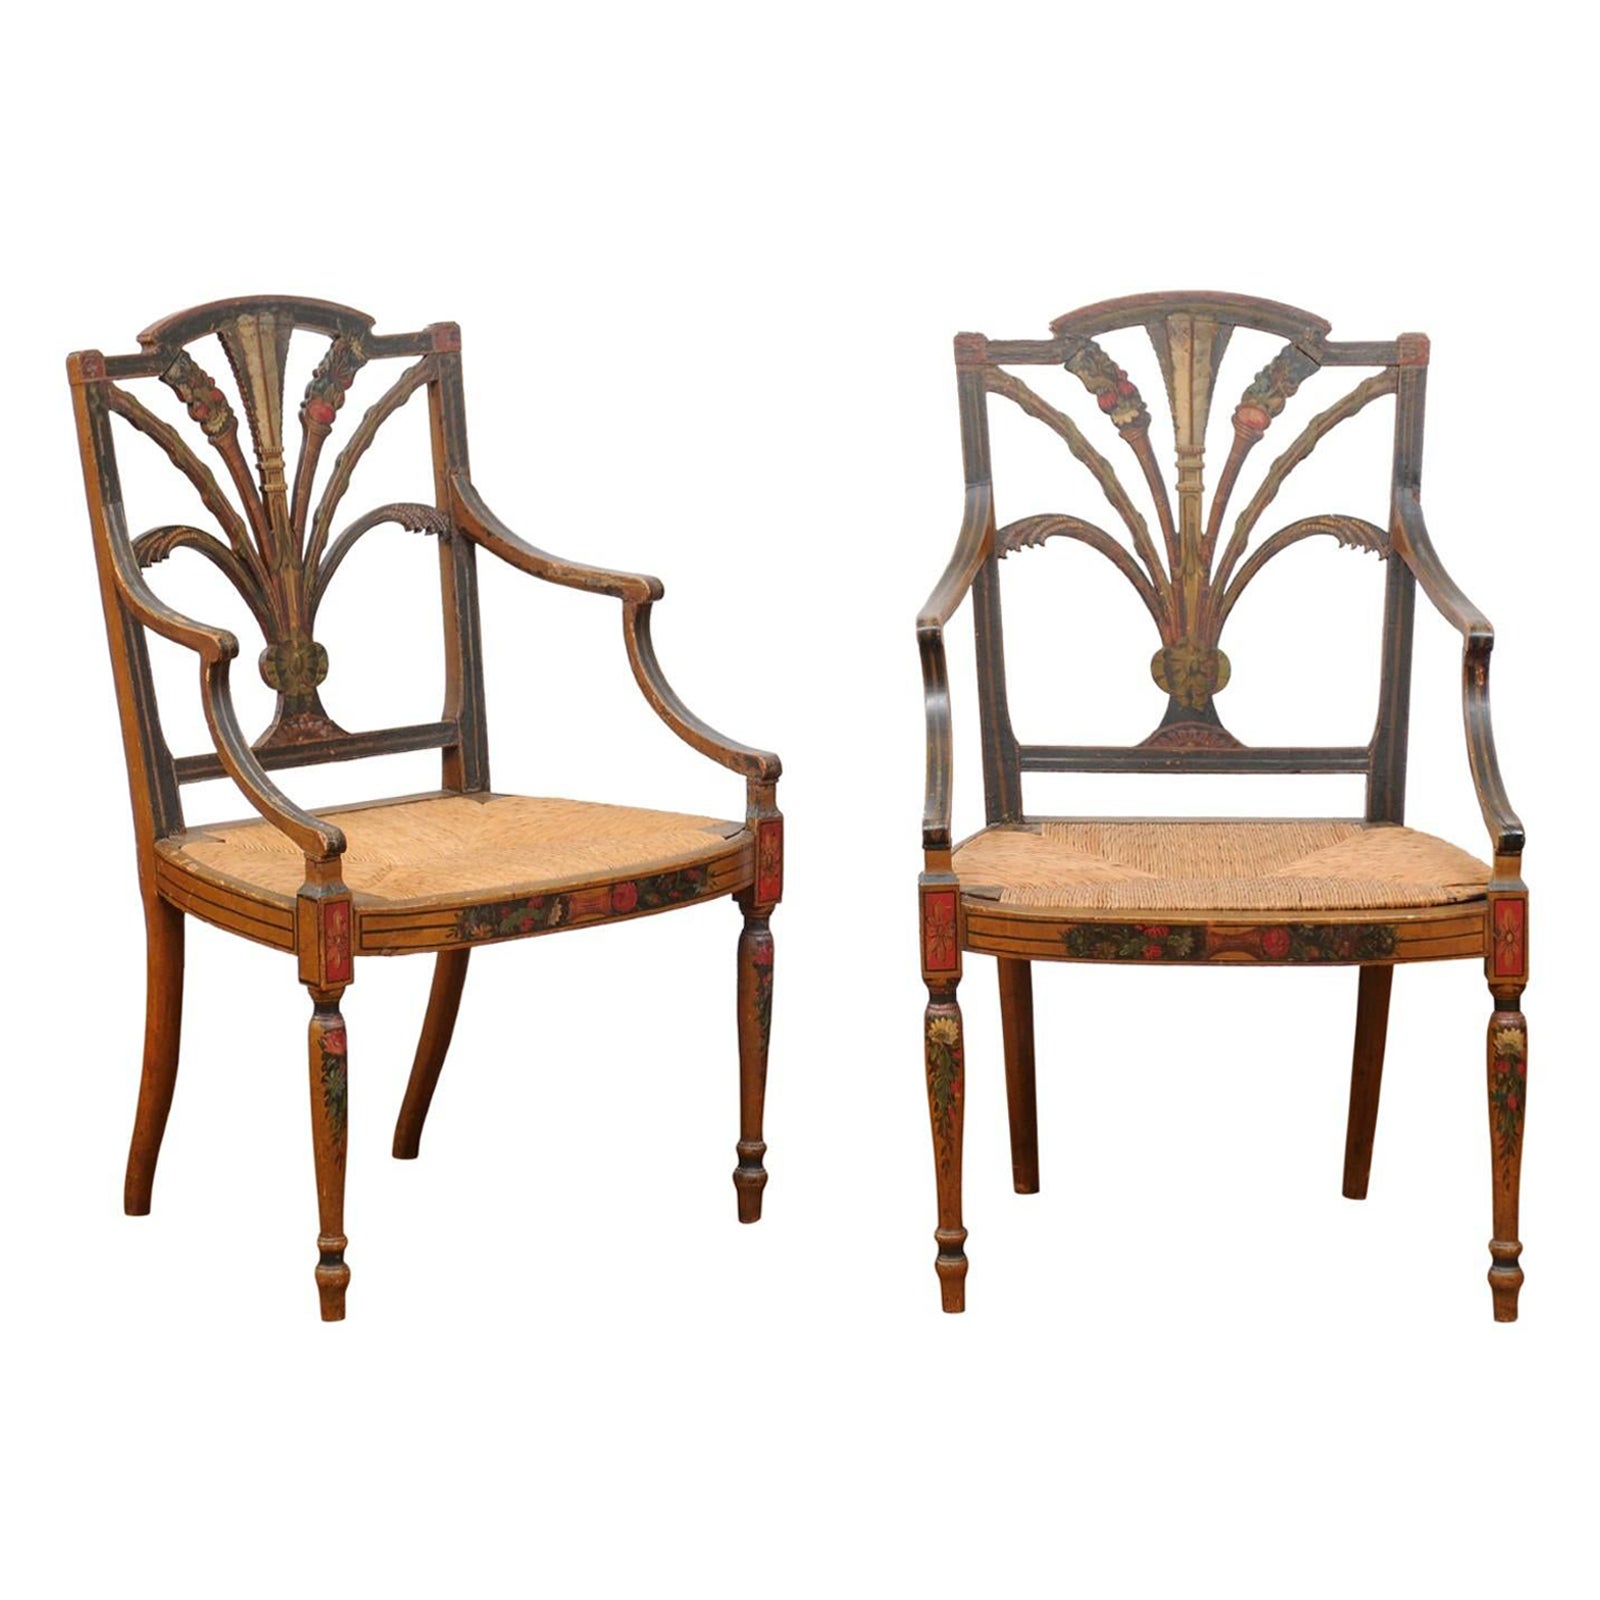 Pair of 19th Century English Adam Style Painted Armchairs with Rush Seats